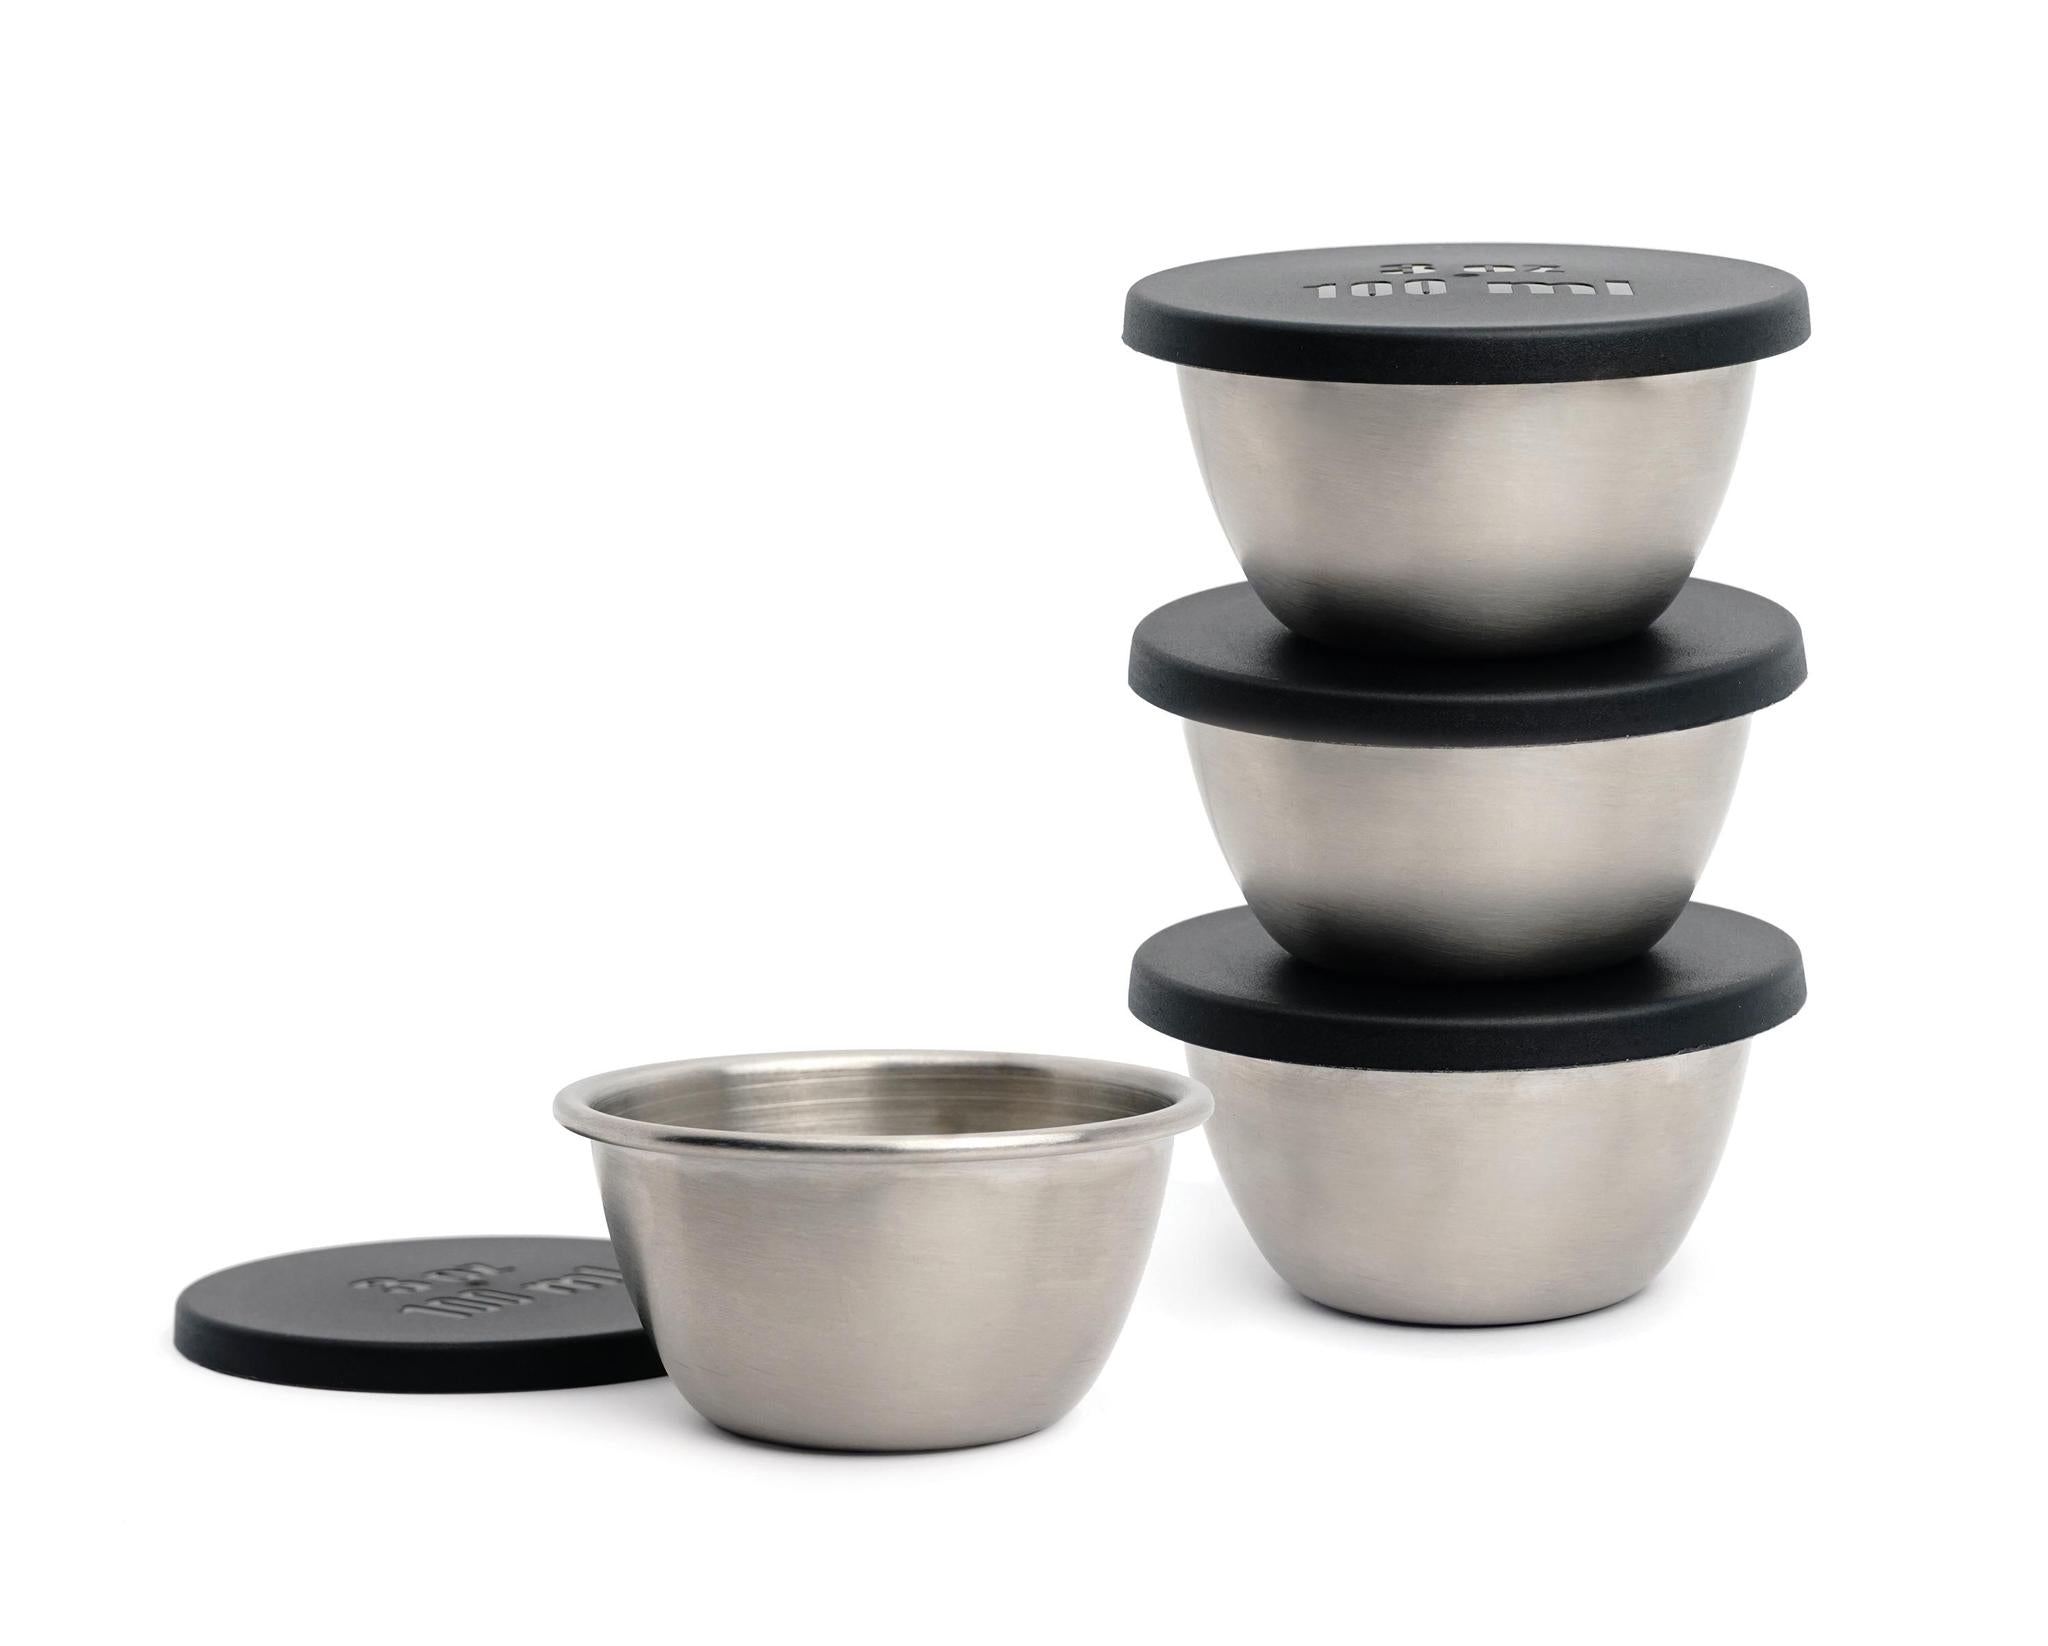 Joie Stainless Steel Condiment Containers, Set of 3